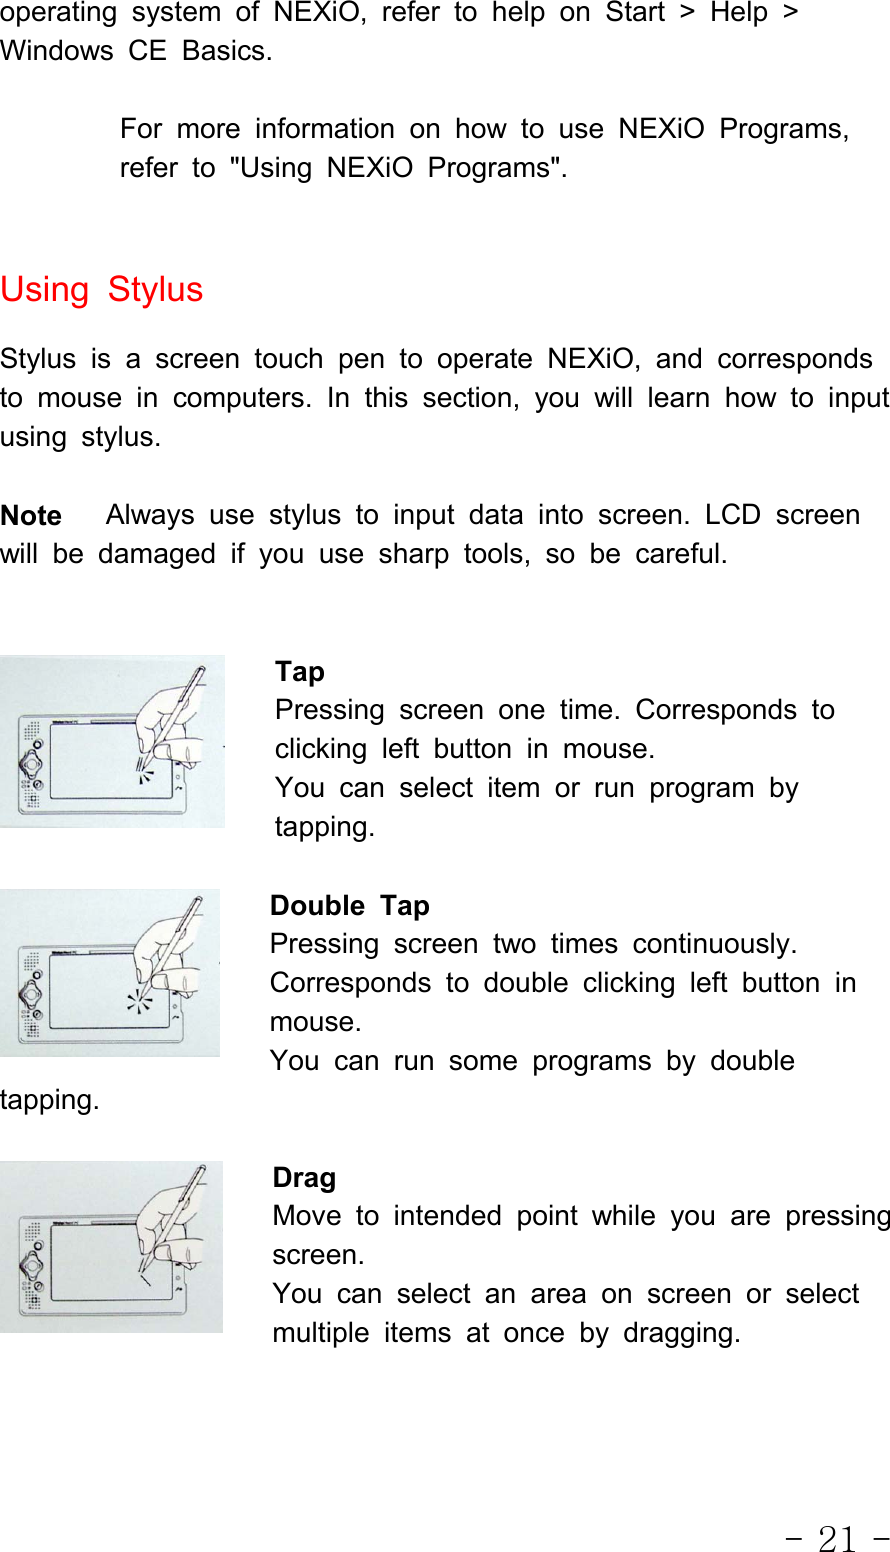 - 21 -operating system of NEXiO, refer to help on Start &gt; Help &gt;Windows CE Basics.For more information on how to use NEXiO Programs,referto&quot;UsingNEXiOPrograms&quot;.Using StylusStylus is a screen touch pen to operate NEXiO, and correspondsto mouse in computers. In this section, you will learn how to inputusing stylus.Note Always use stylus to input data into screen. LCD screenwill be damaged if you use sharp tools, so be careful.TapPressing screen one time. Corresponds toclicking left button in mouse.You can select item or run program bytapping.Double TapPressing screen two times continuously.Corresponds to double clicking left button inmouse.You can run some programs by doubletapping.DragMove to intended point while you are pressingscreen.You can select an area on screen or selectmultiple items at once by dragging.